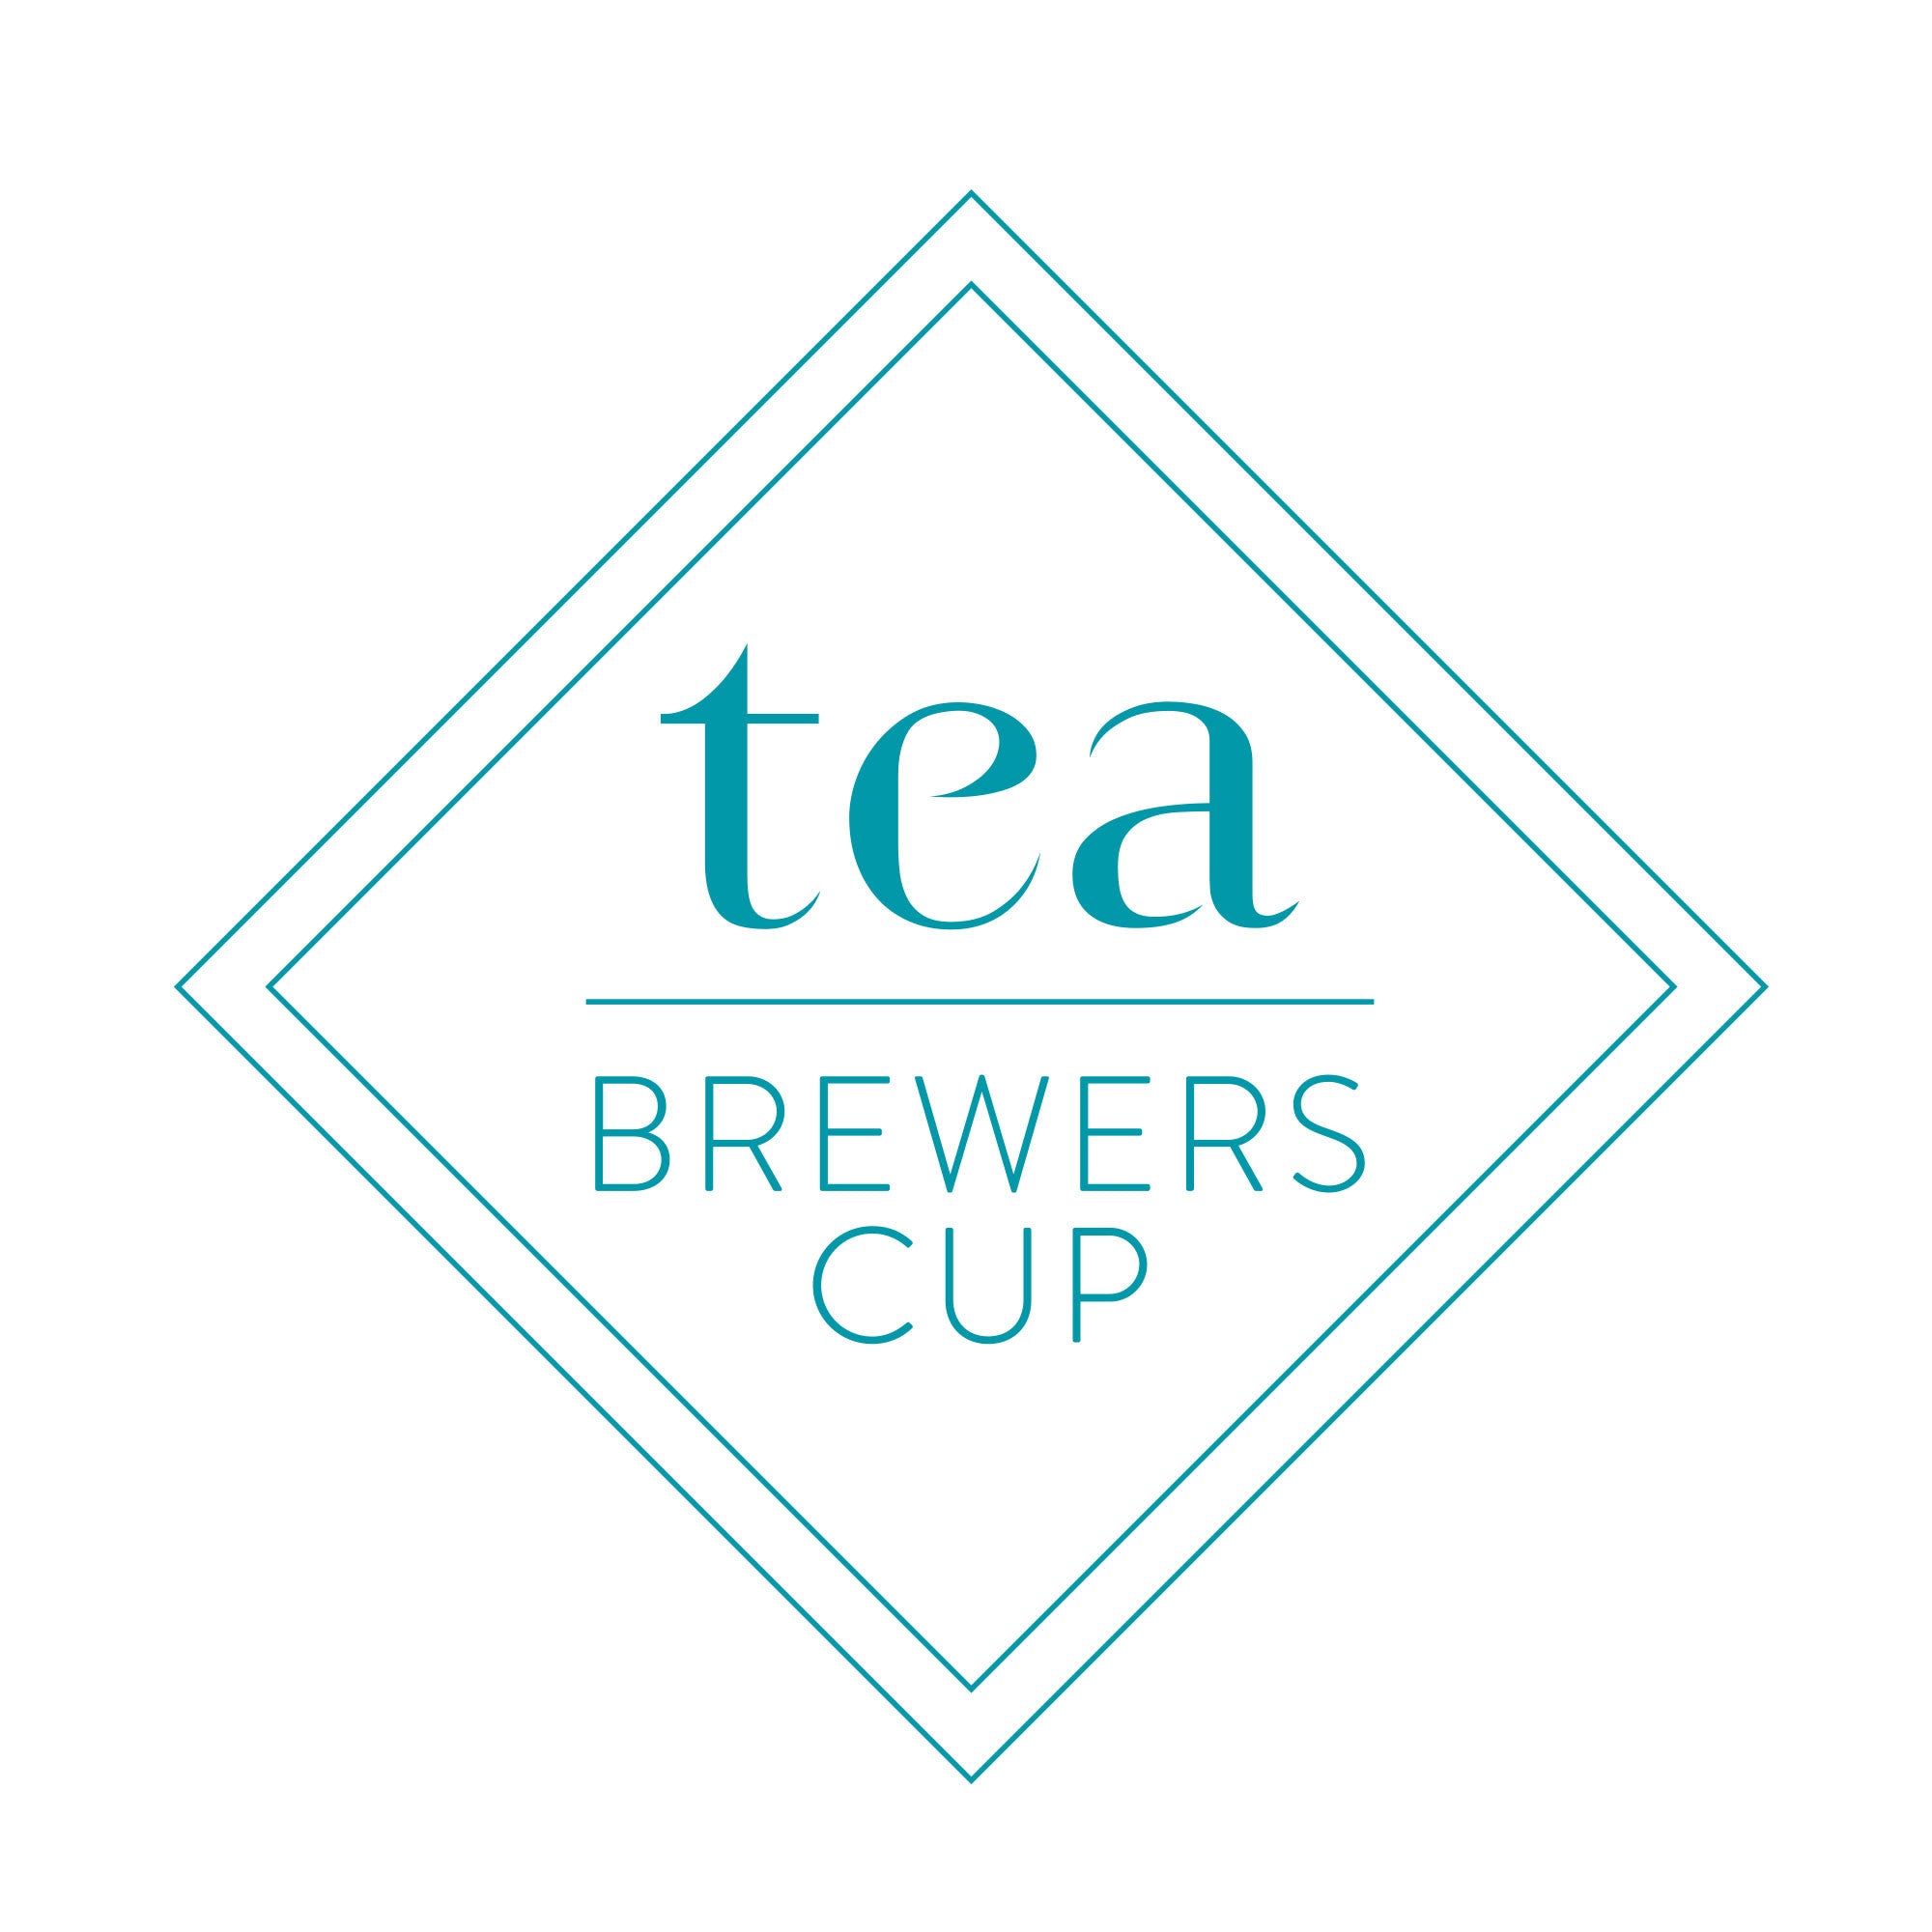 More spaces released for Tea Brewers Cup.